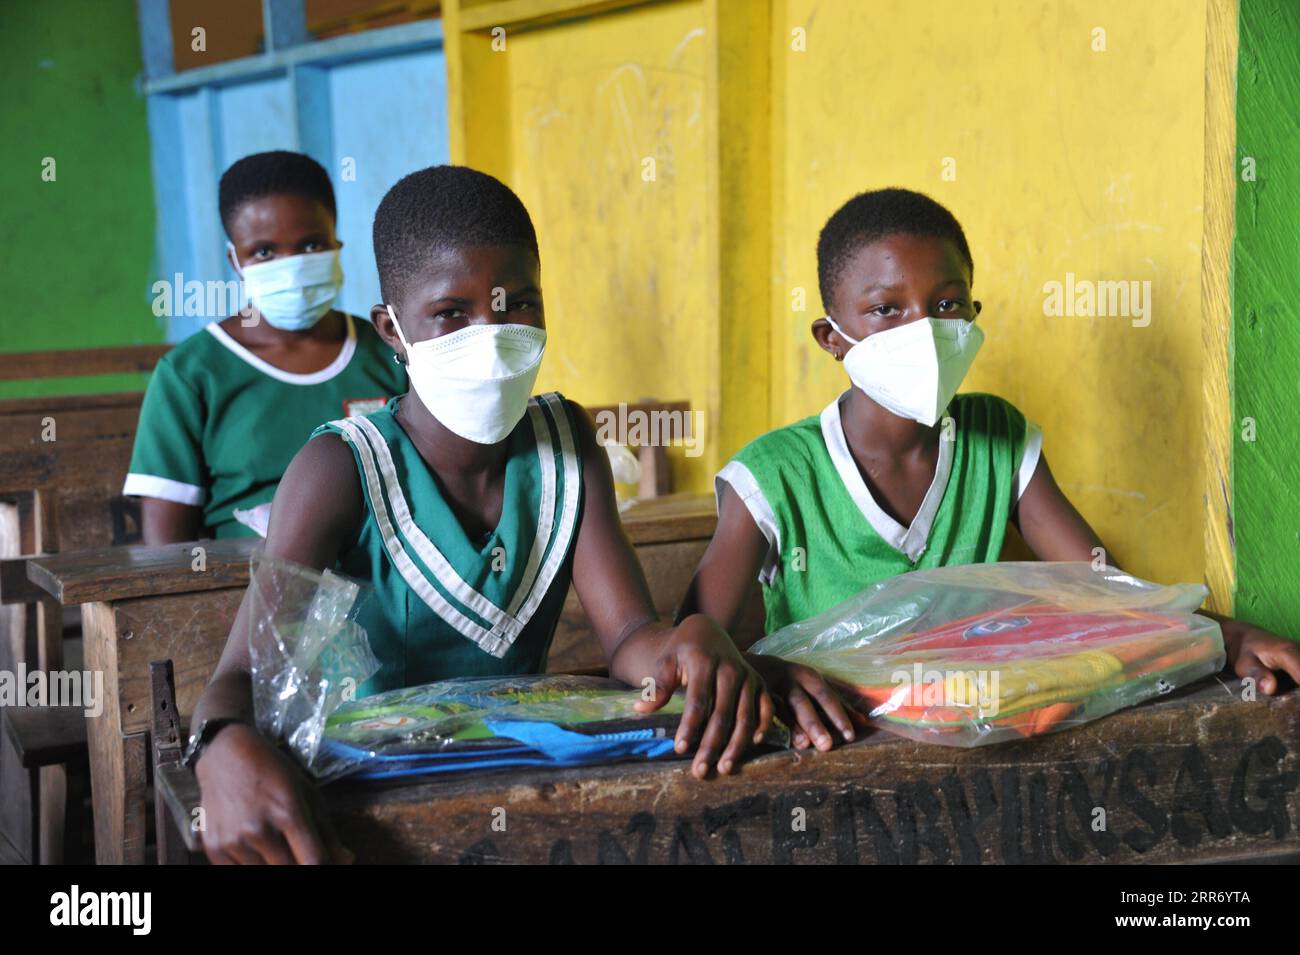 210305 -- ACCRA, March 5, 2021 -- Students are seen with their new